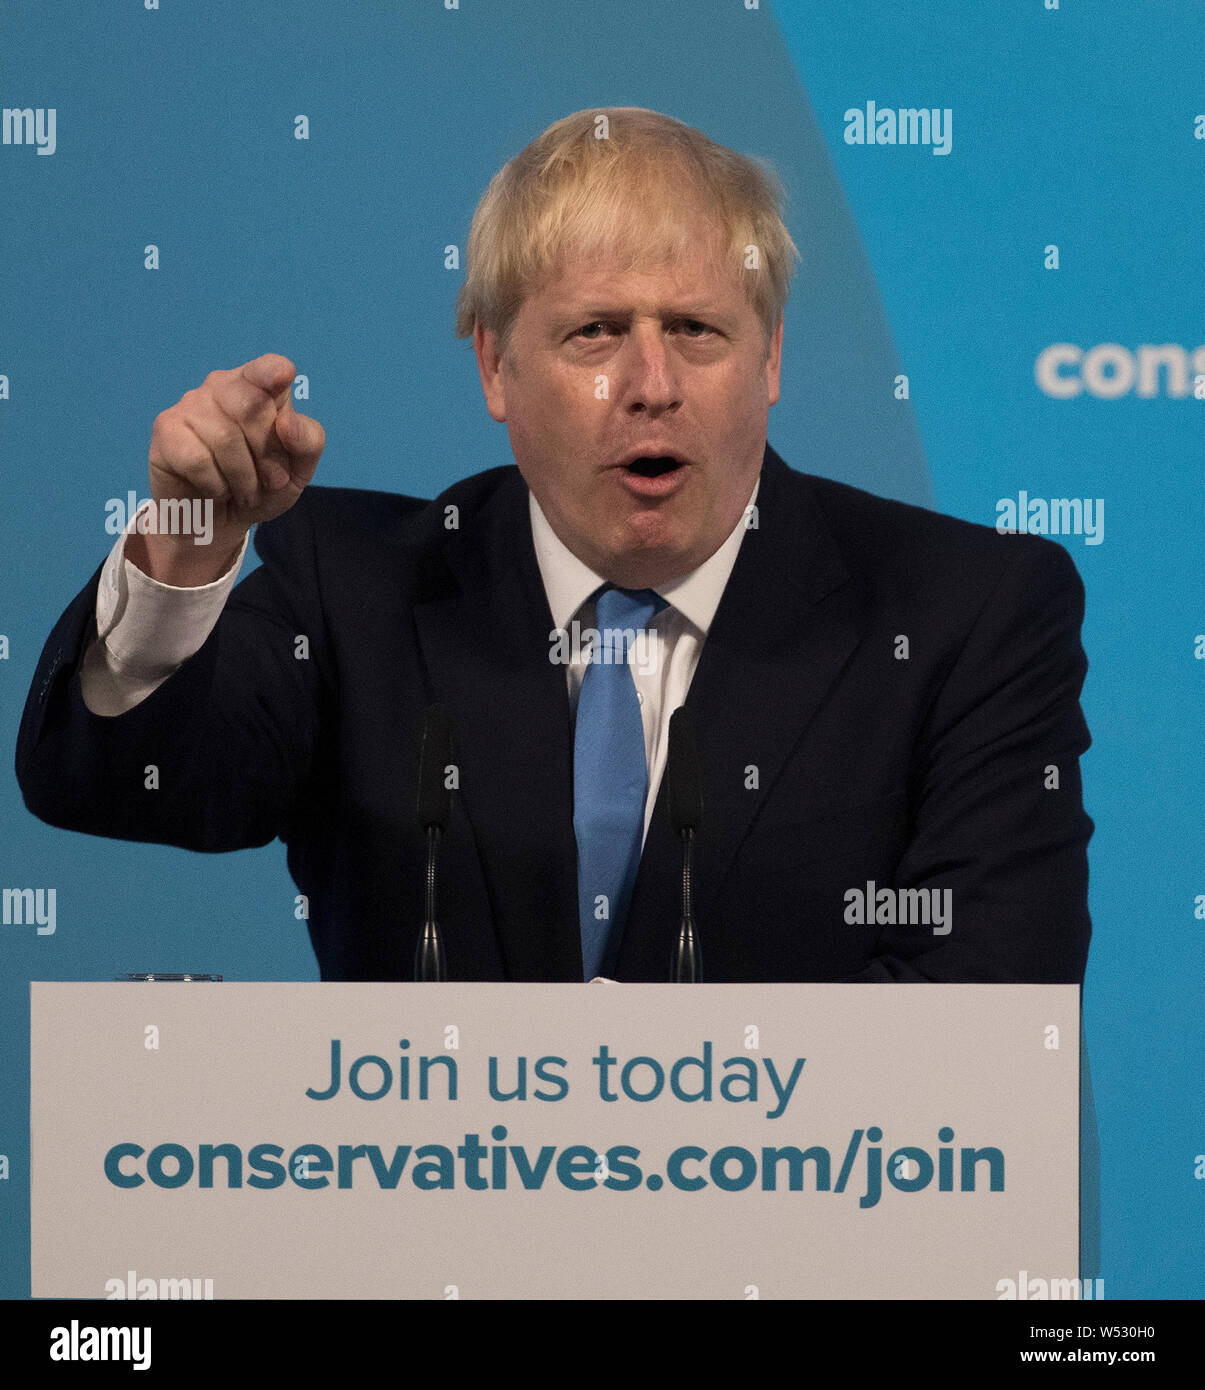 Newly elected British Prime Minister Boris Johnson speaks during the Conservative Leadership announcement at the QEII Centre on July 23, 2019 in London, England. After a month of hustings, campaigning and televised debates the members of the UK's Conservative and Unionist Party have voted for Boris Johnson to be their new leader and the country's next Prime Minister, replacing Theresa May. Stock Photo